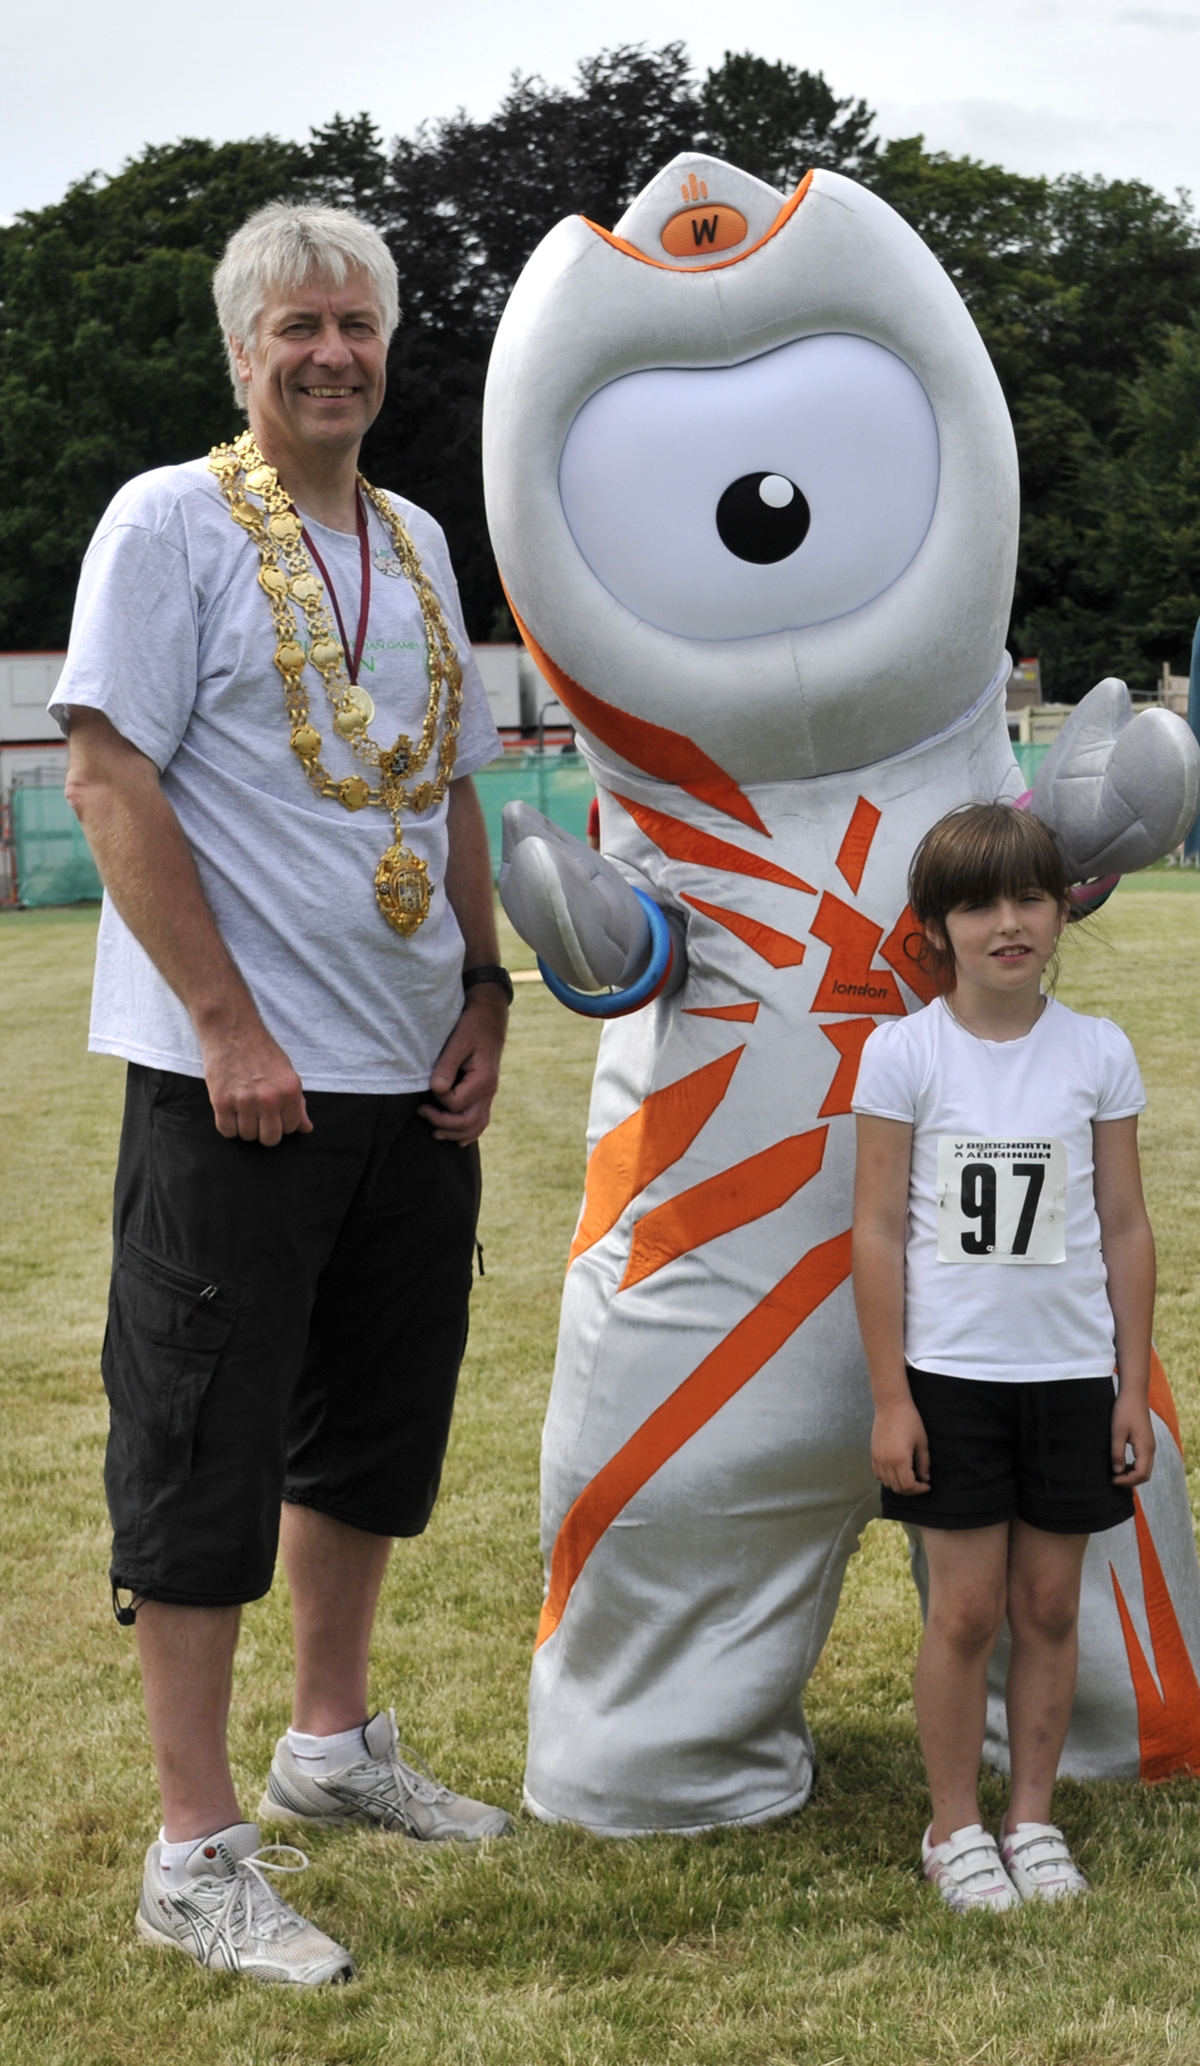 Mike and Wenlock